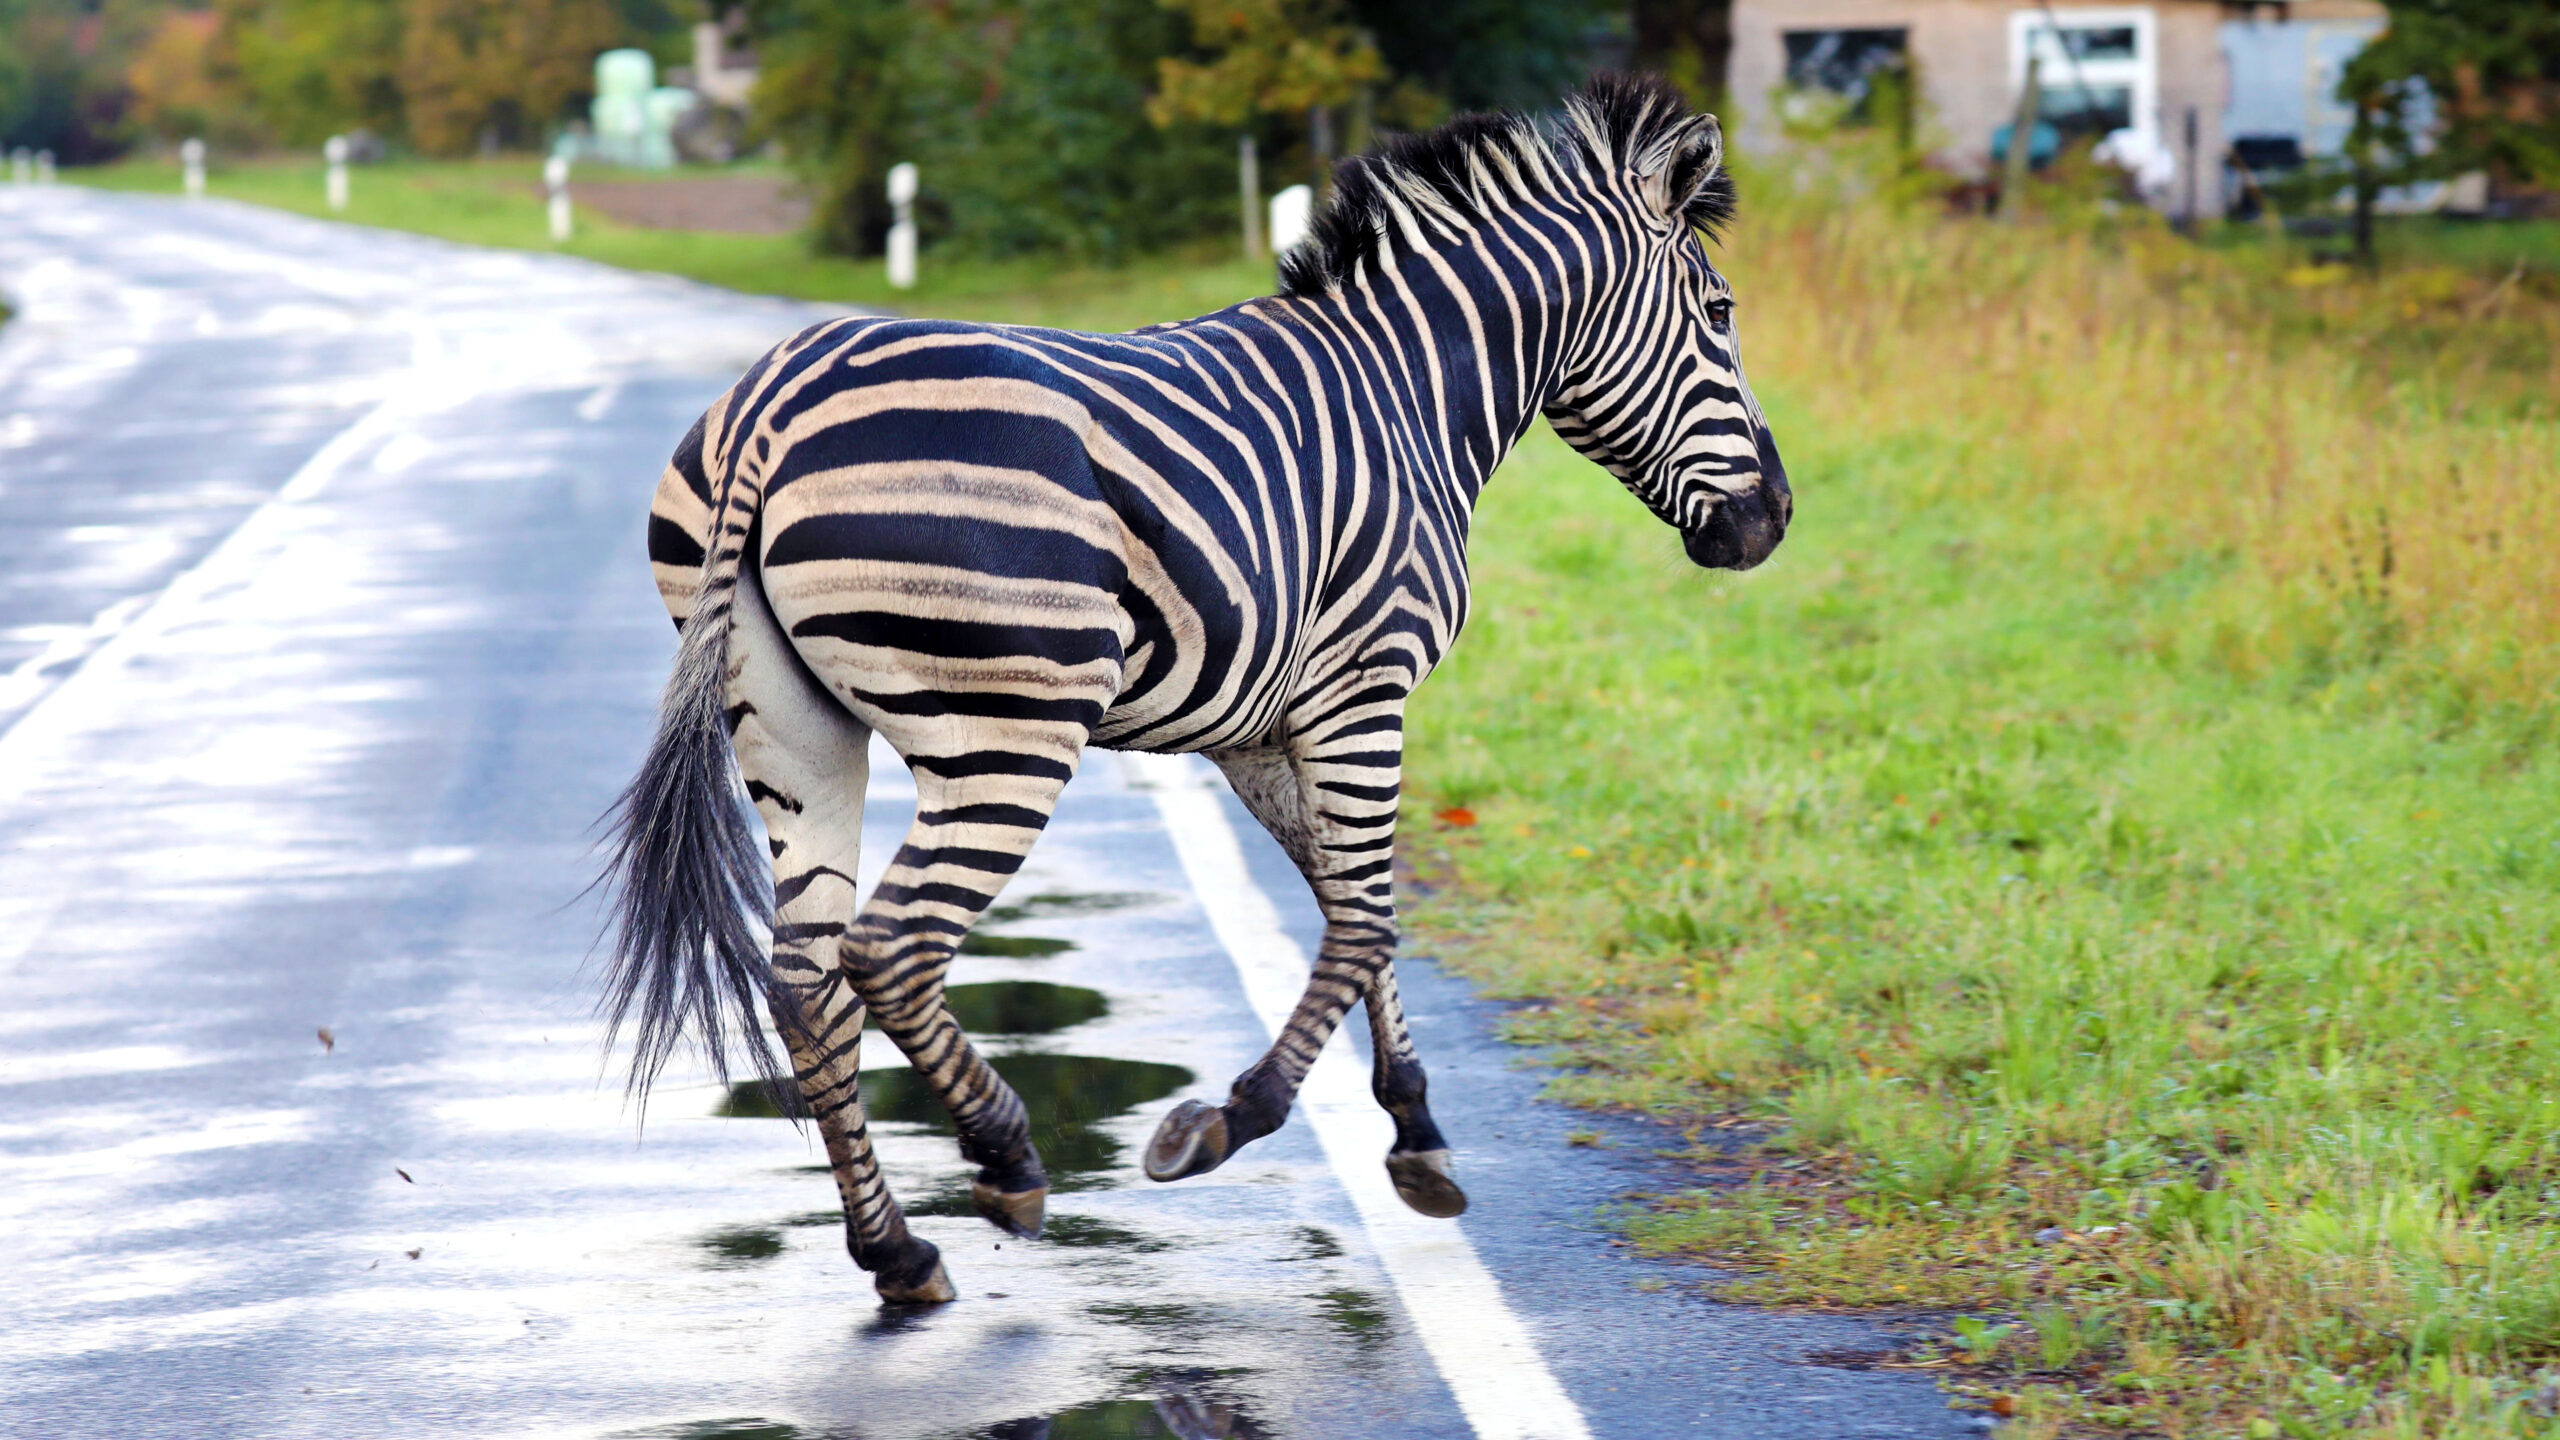 Police Forced To Shoot Zebra In Ohio After It Nearly Rips Man’s Arm Off, Moves In On Deputy